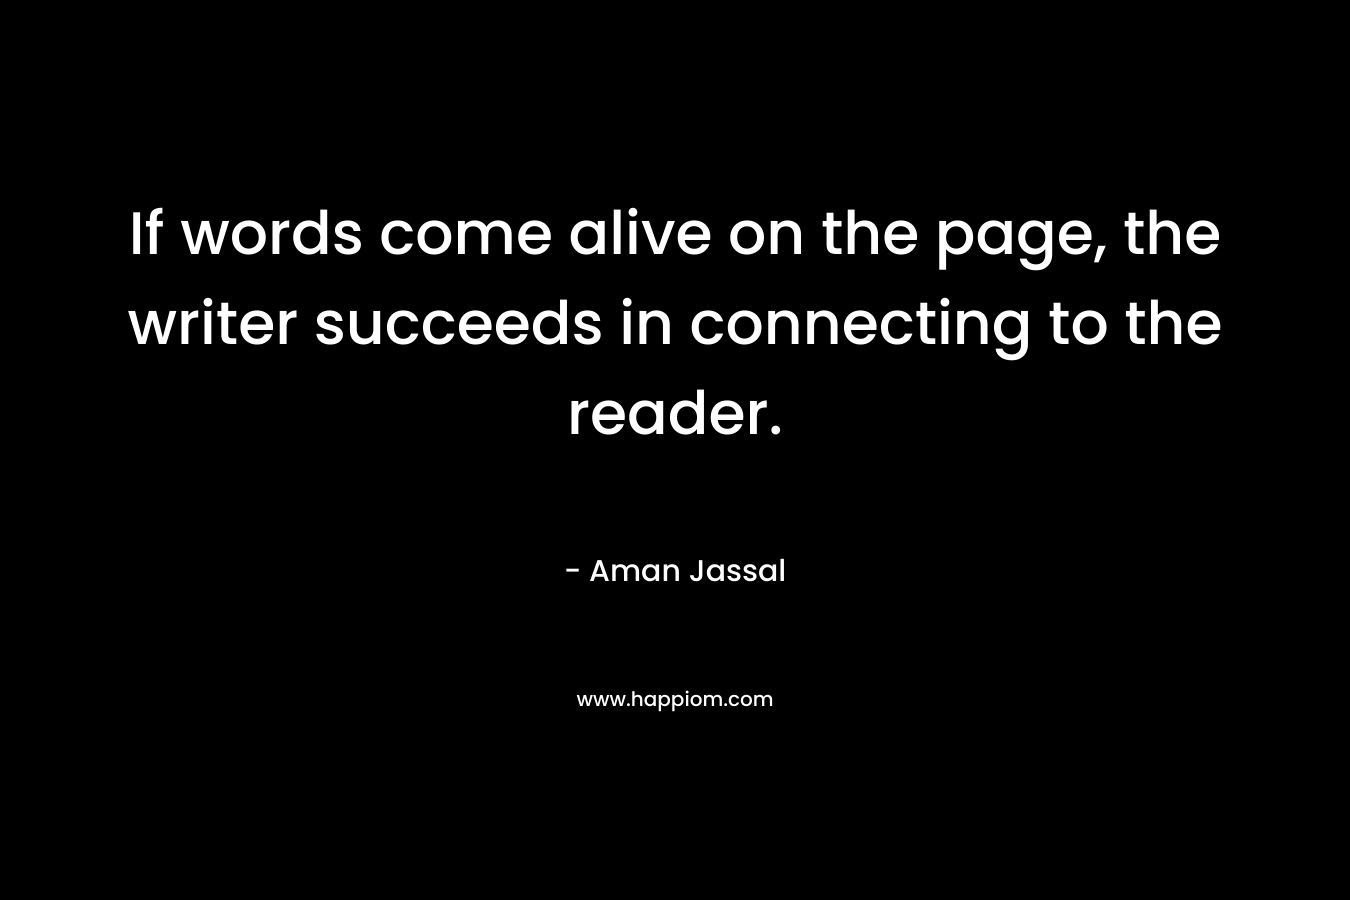 If words come alive on the page, the writer succeeds in connecting to the reader.